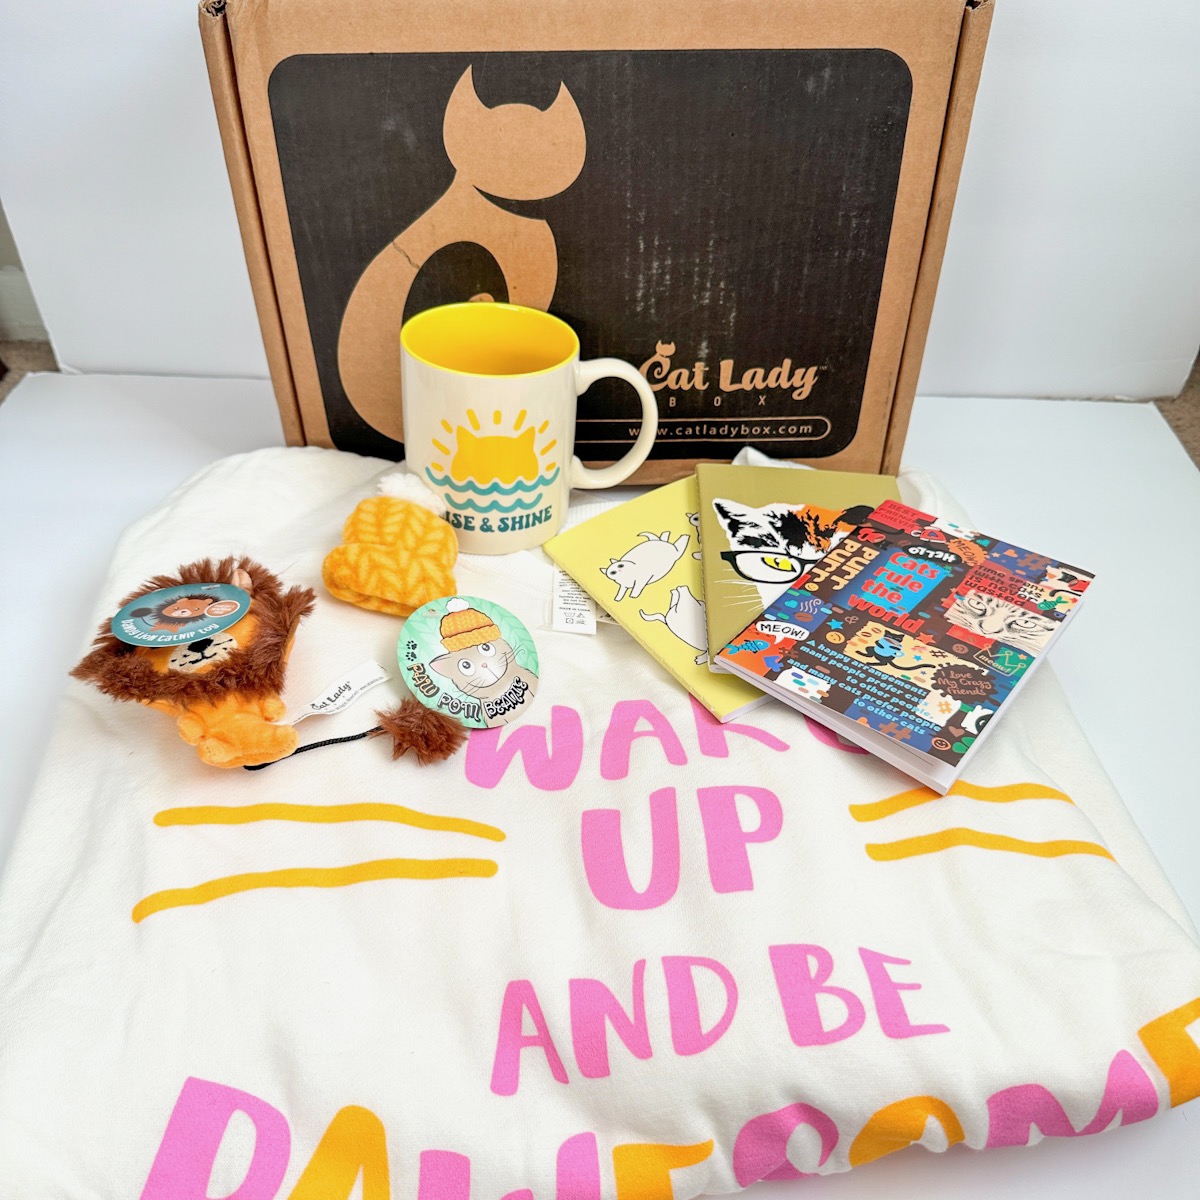 Cat Lady Box Subscription January 2023 “Purrfect Mornin” Box Review